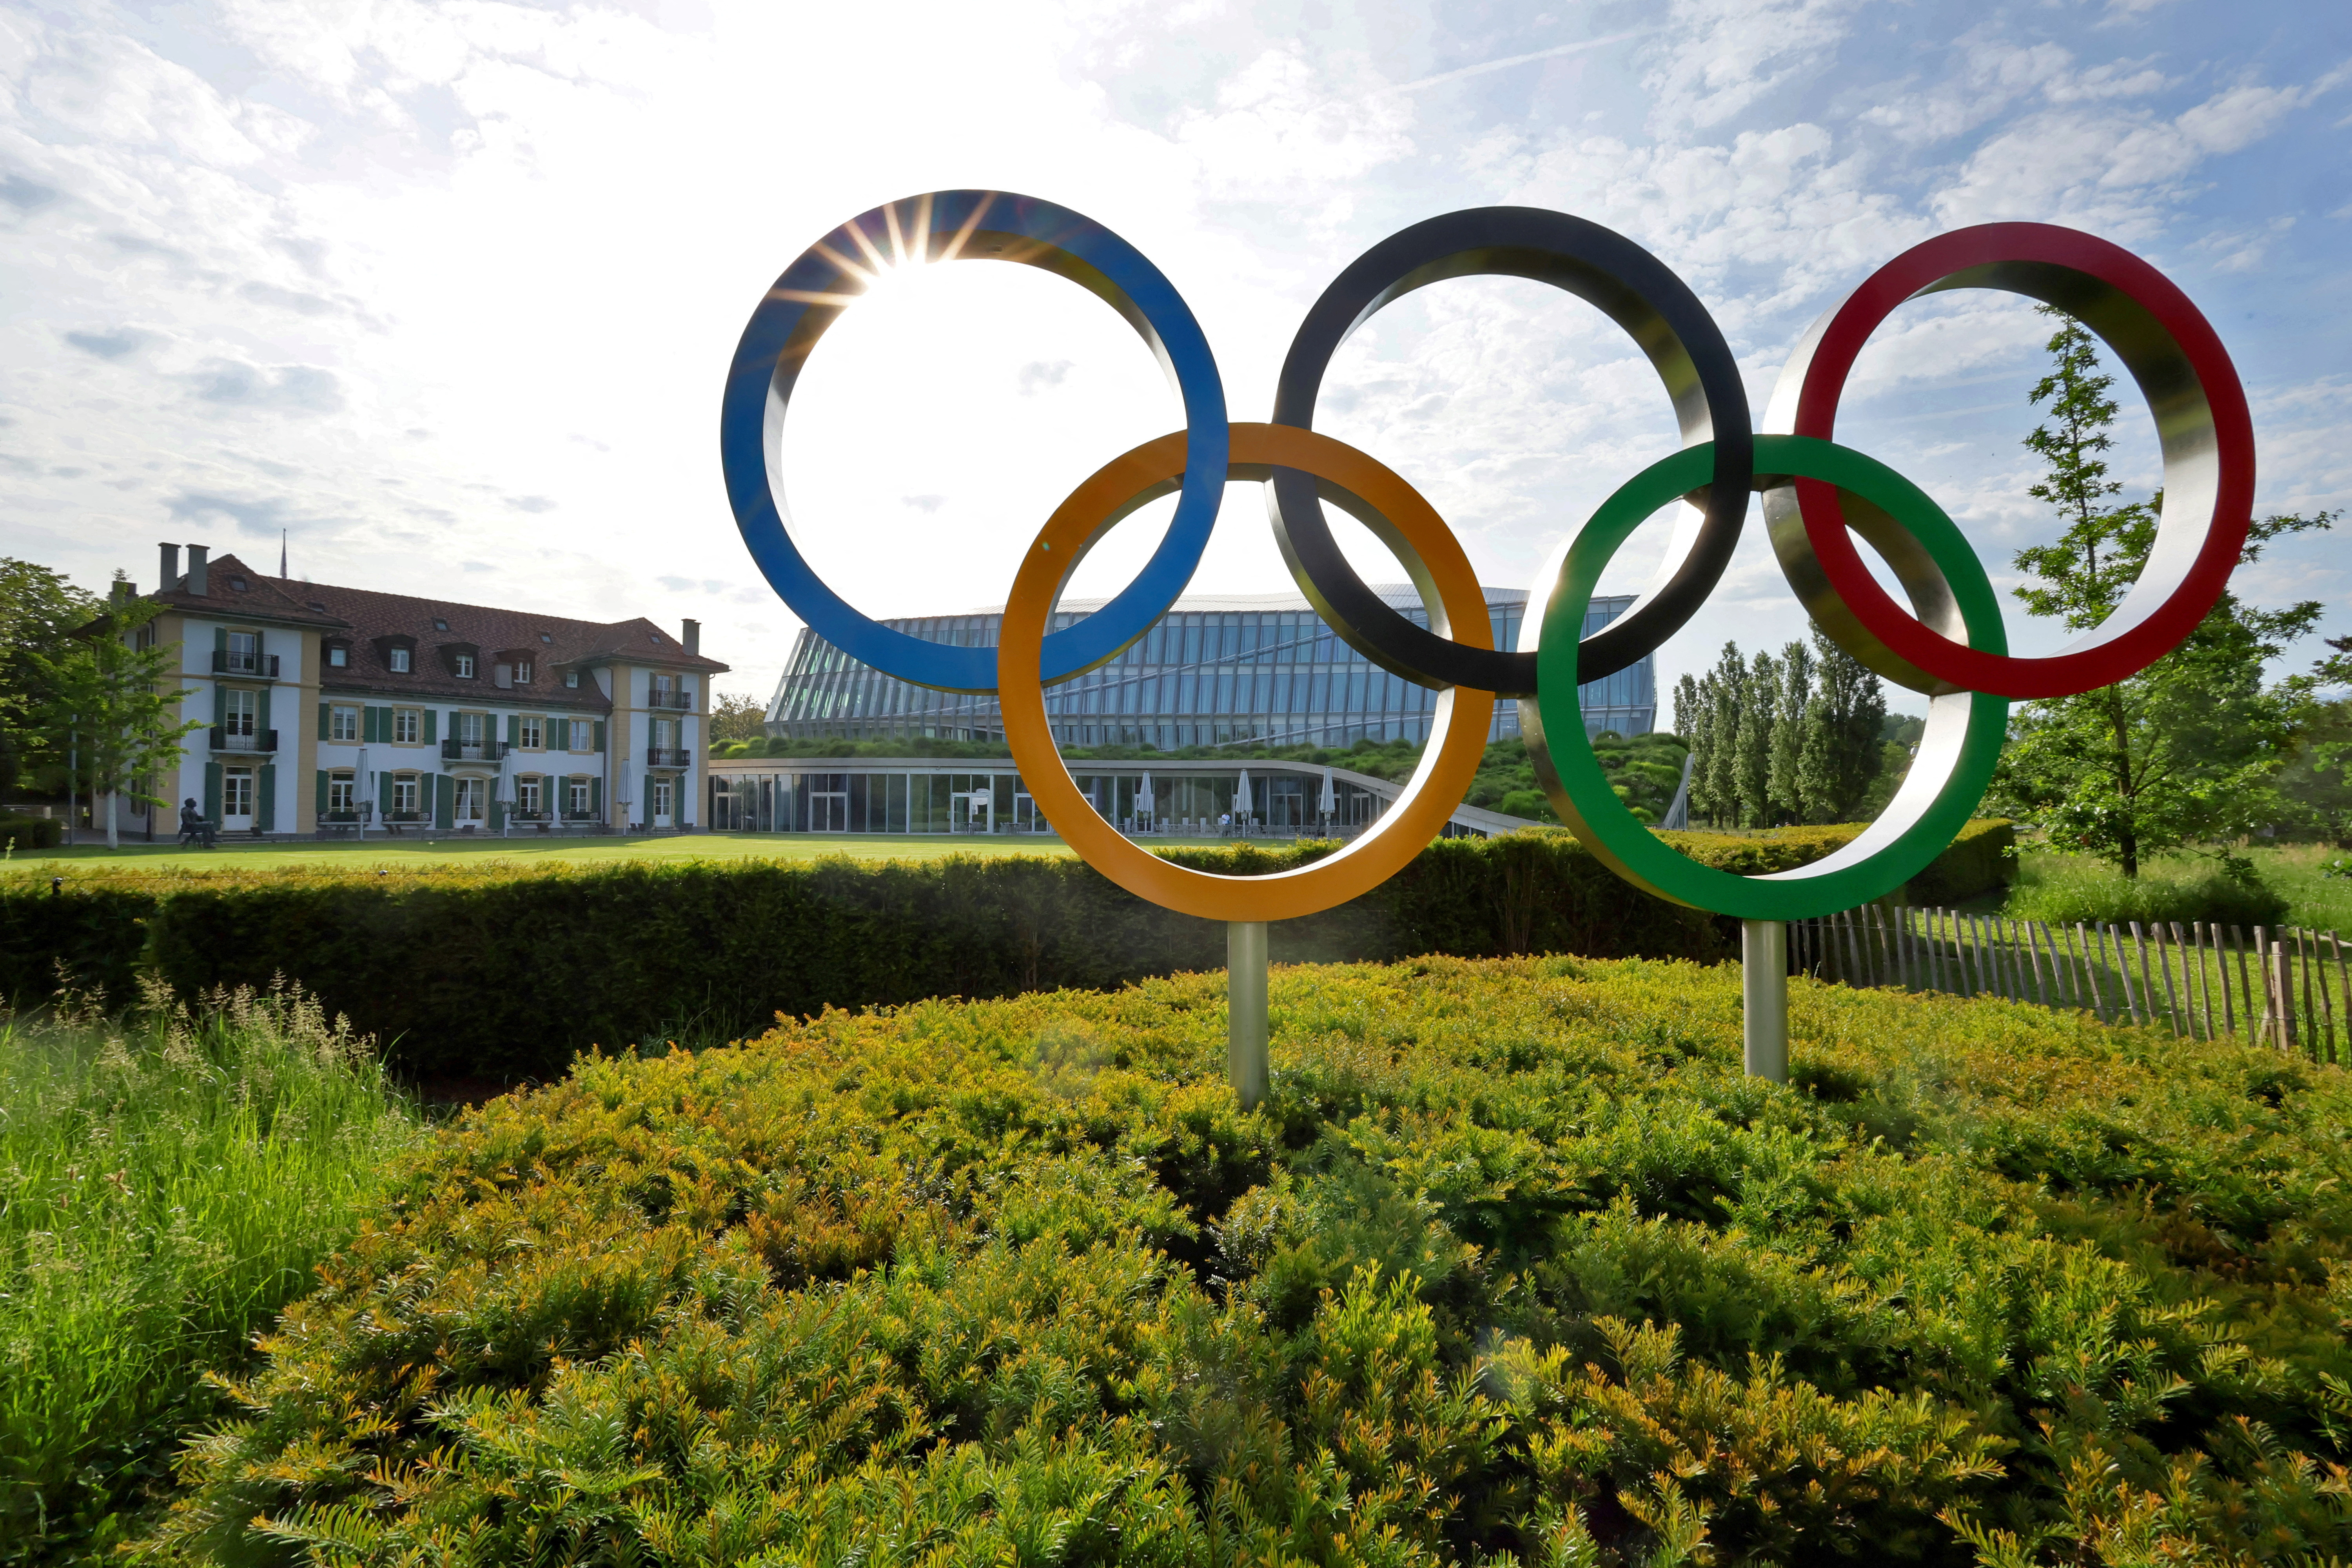 FILE PHOTO: The Olympic rings are pictured in front of the International Olympic Committee (IOC) headquarters in Lausanne, Switzerland, May 17, 2022. REUTERS/Denis Balibouse/File Photo